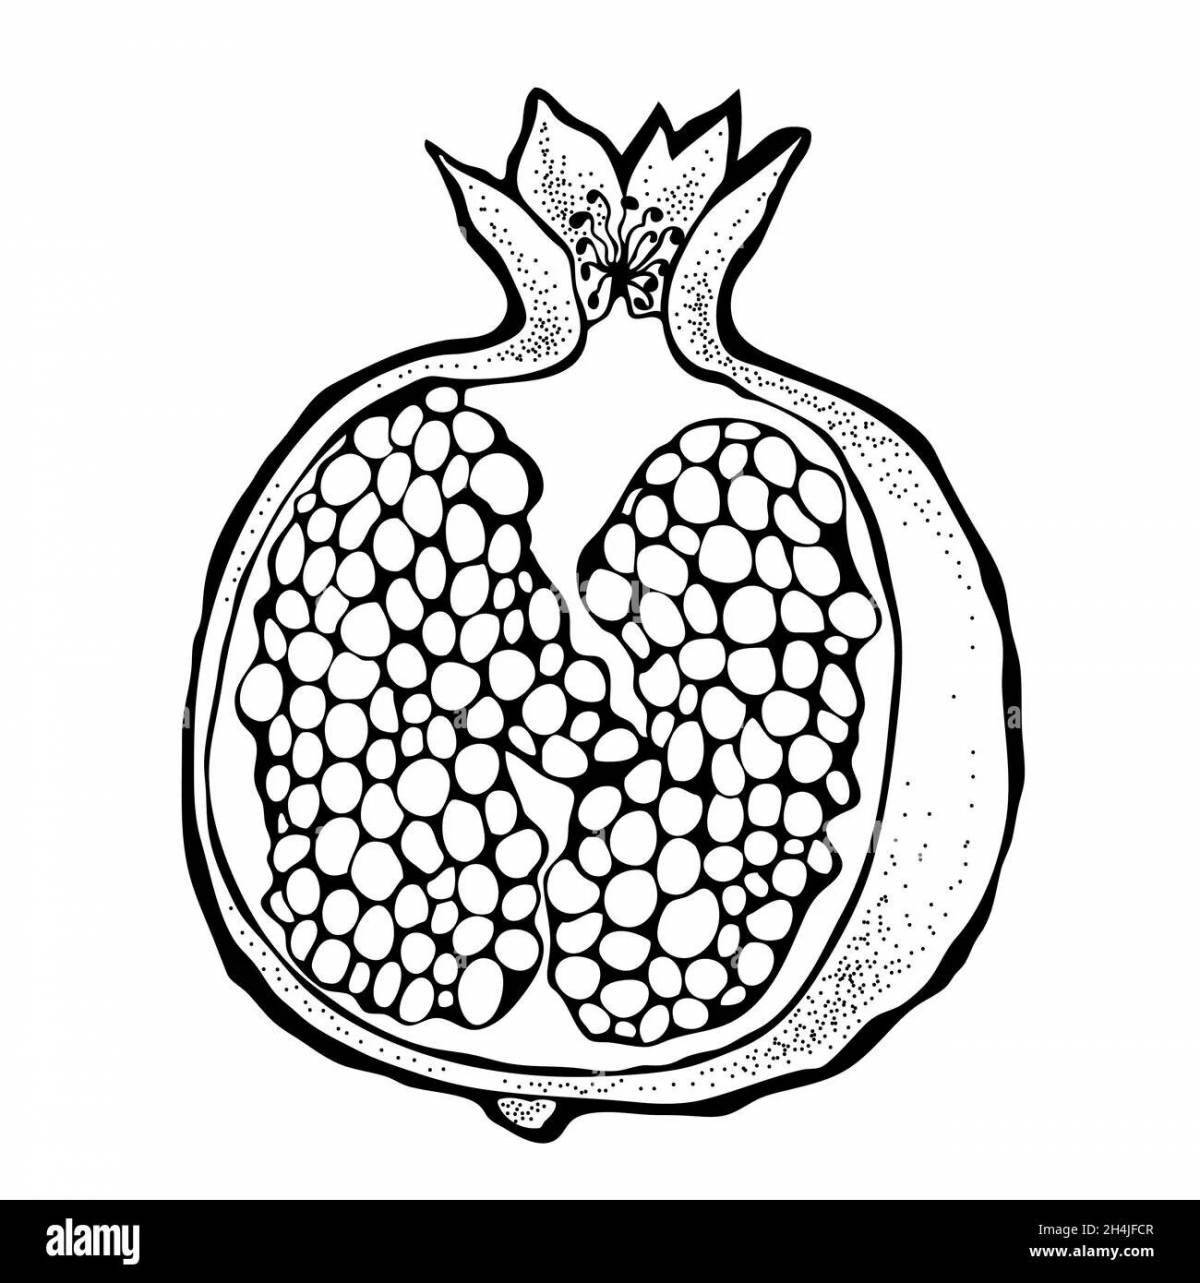 Great pomegranate coloring pages for kids